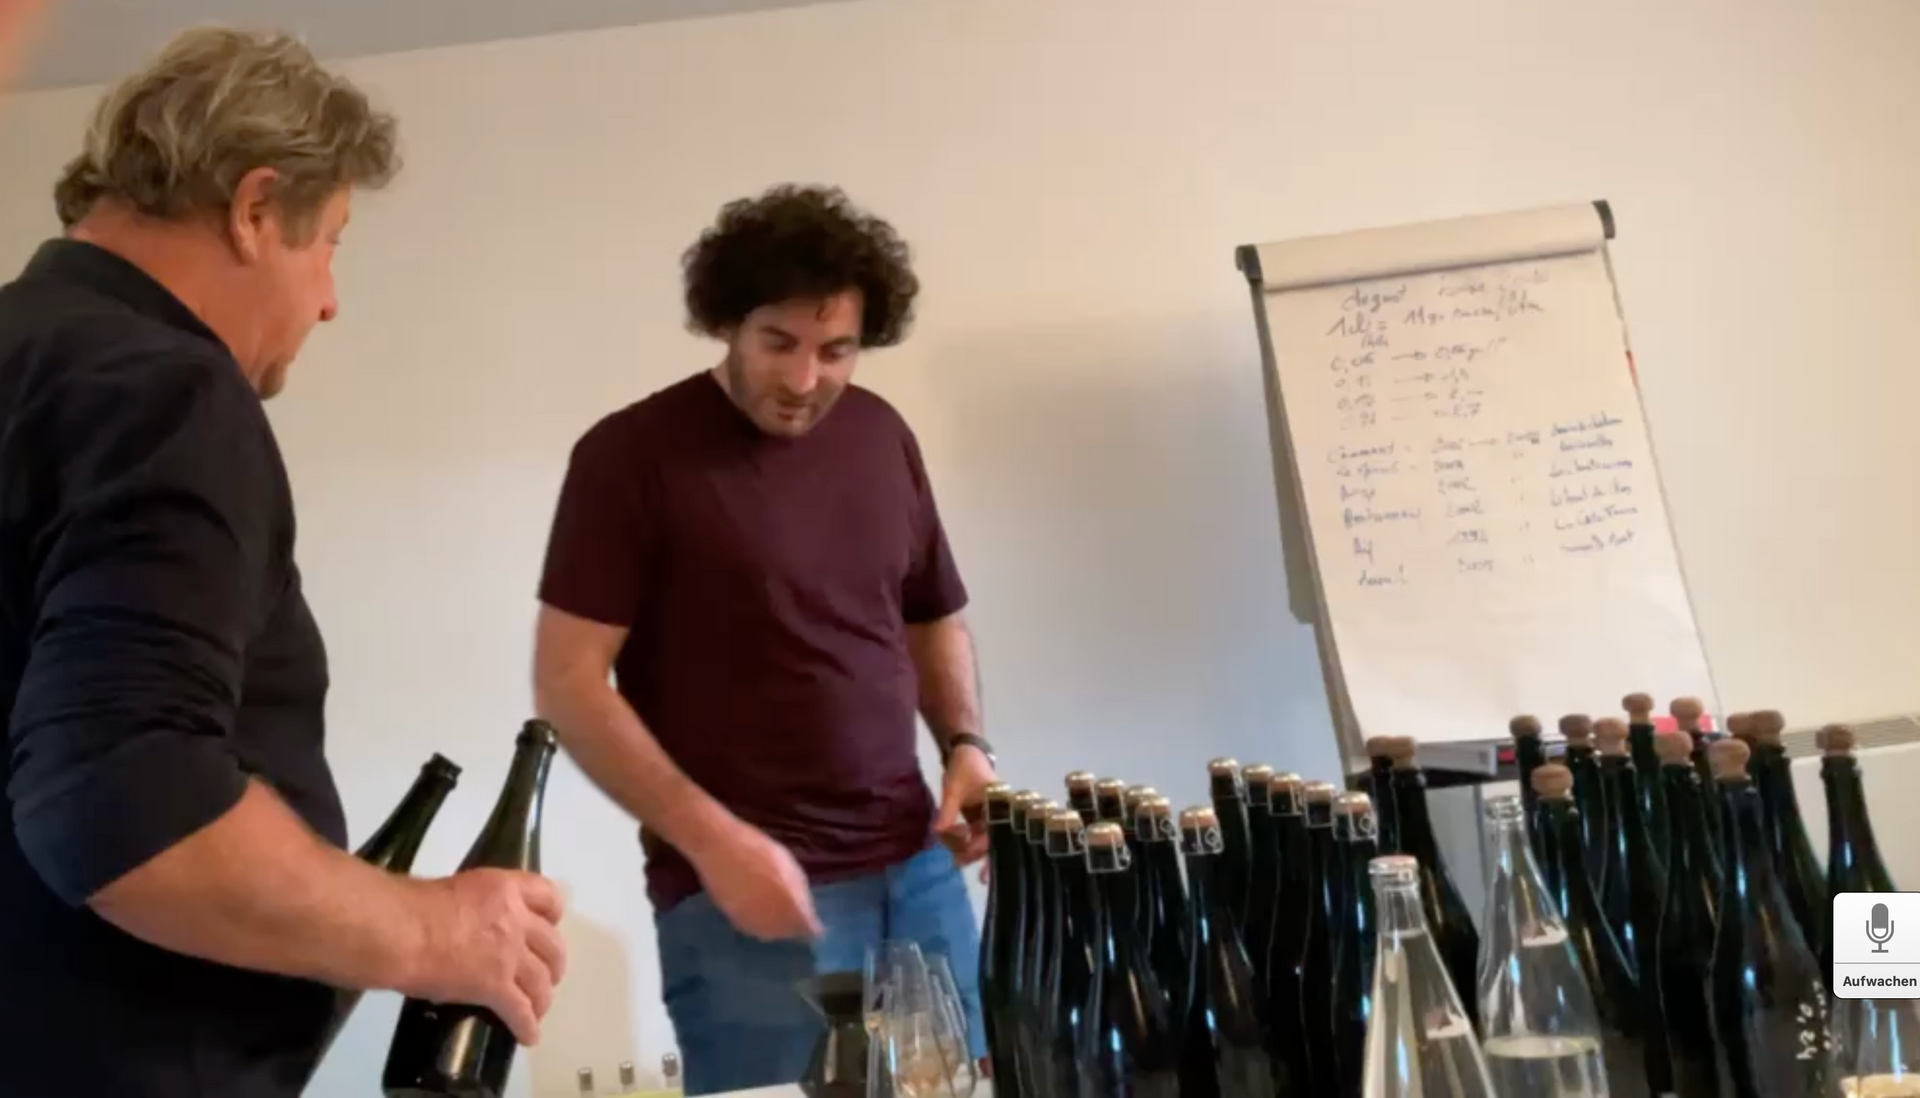 Anselme and Guillaume Selosse, Domaine Jacques Selosse, Avize, Champagne, Dosage-Tasting